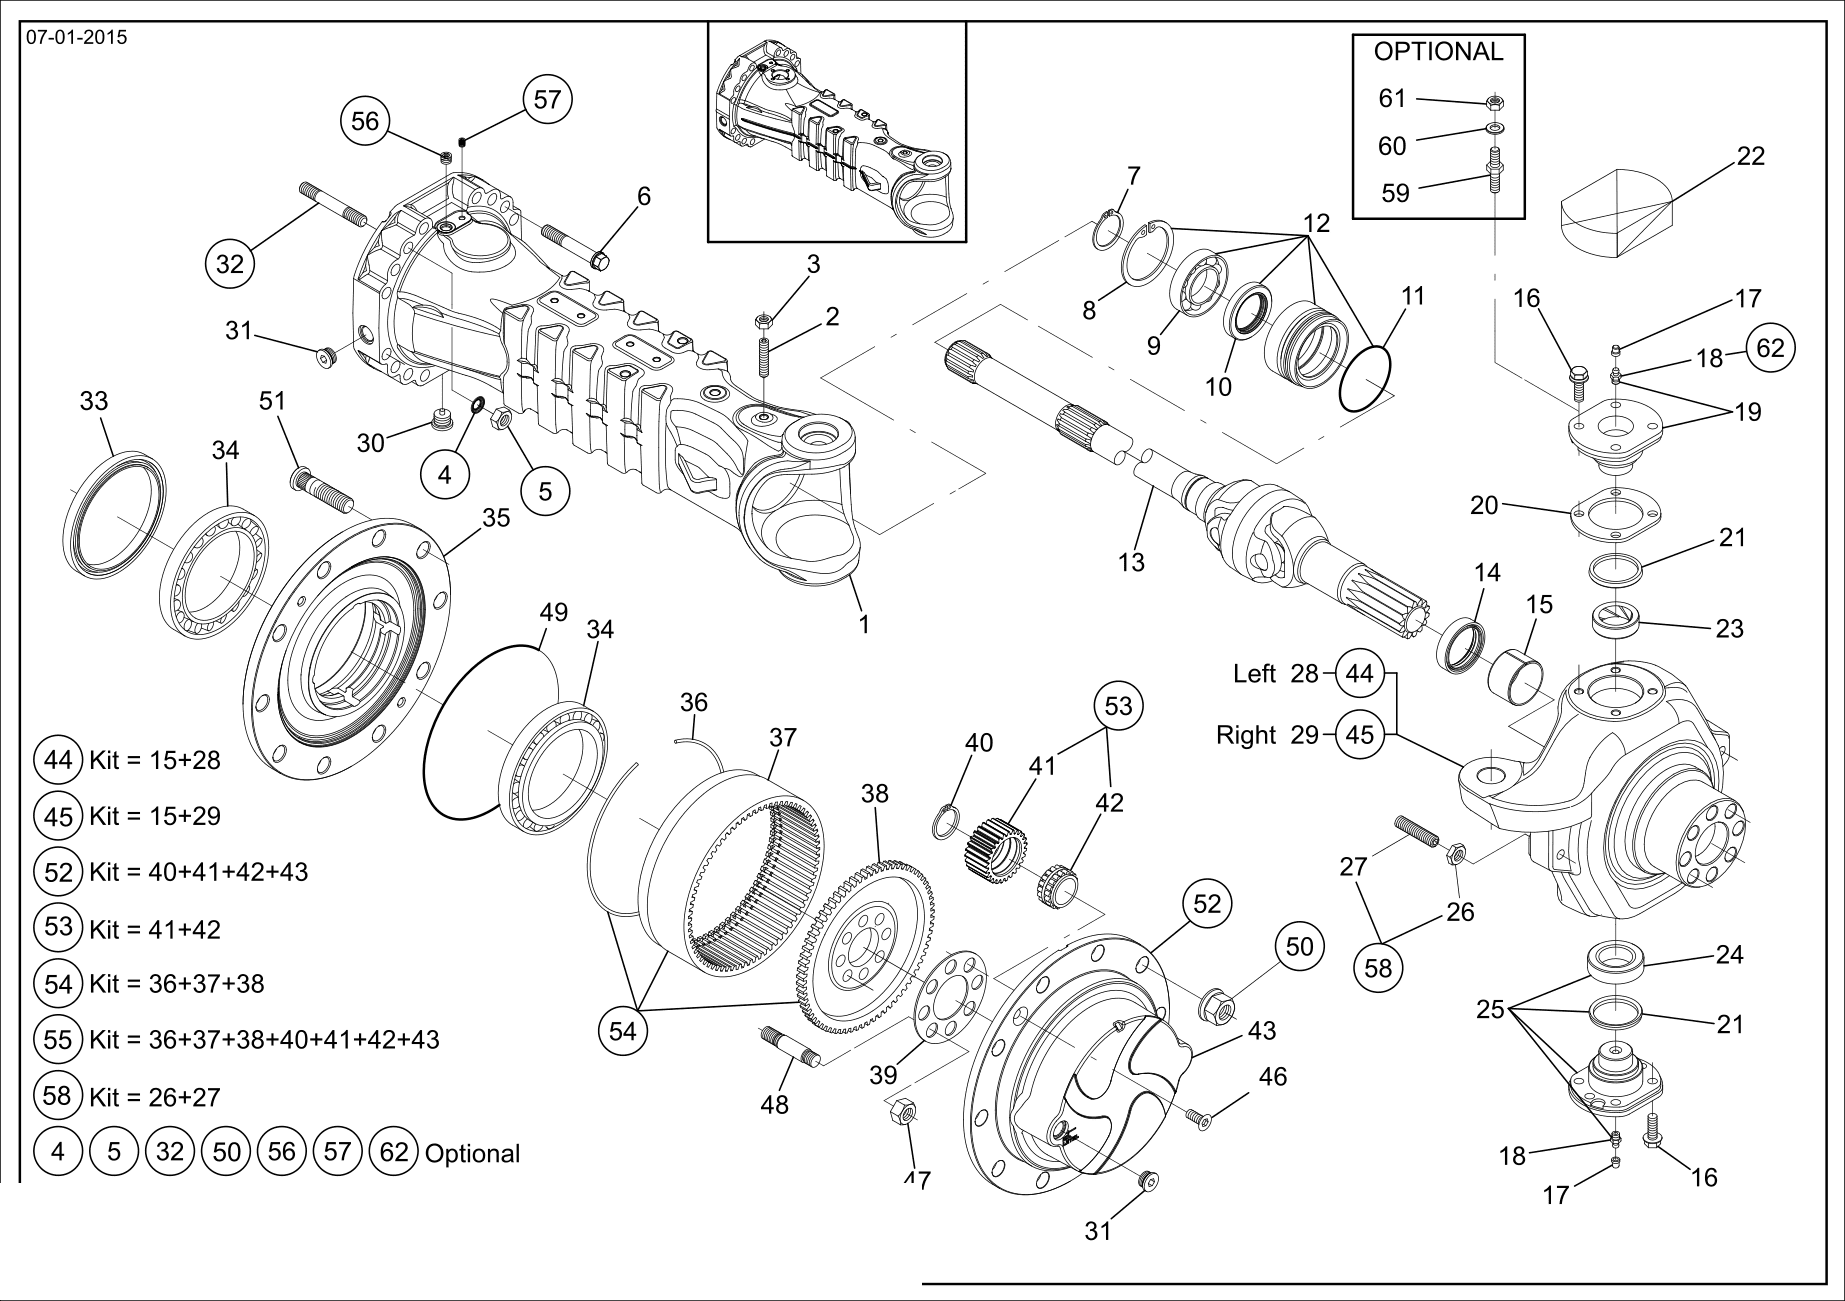 drawing for CNH NEW HOLLAND 87541837 - STEERING CASE (figure 5)